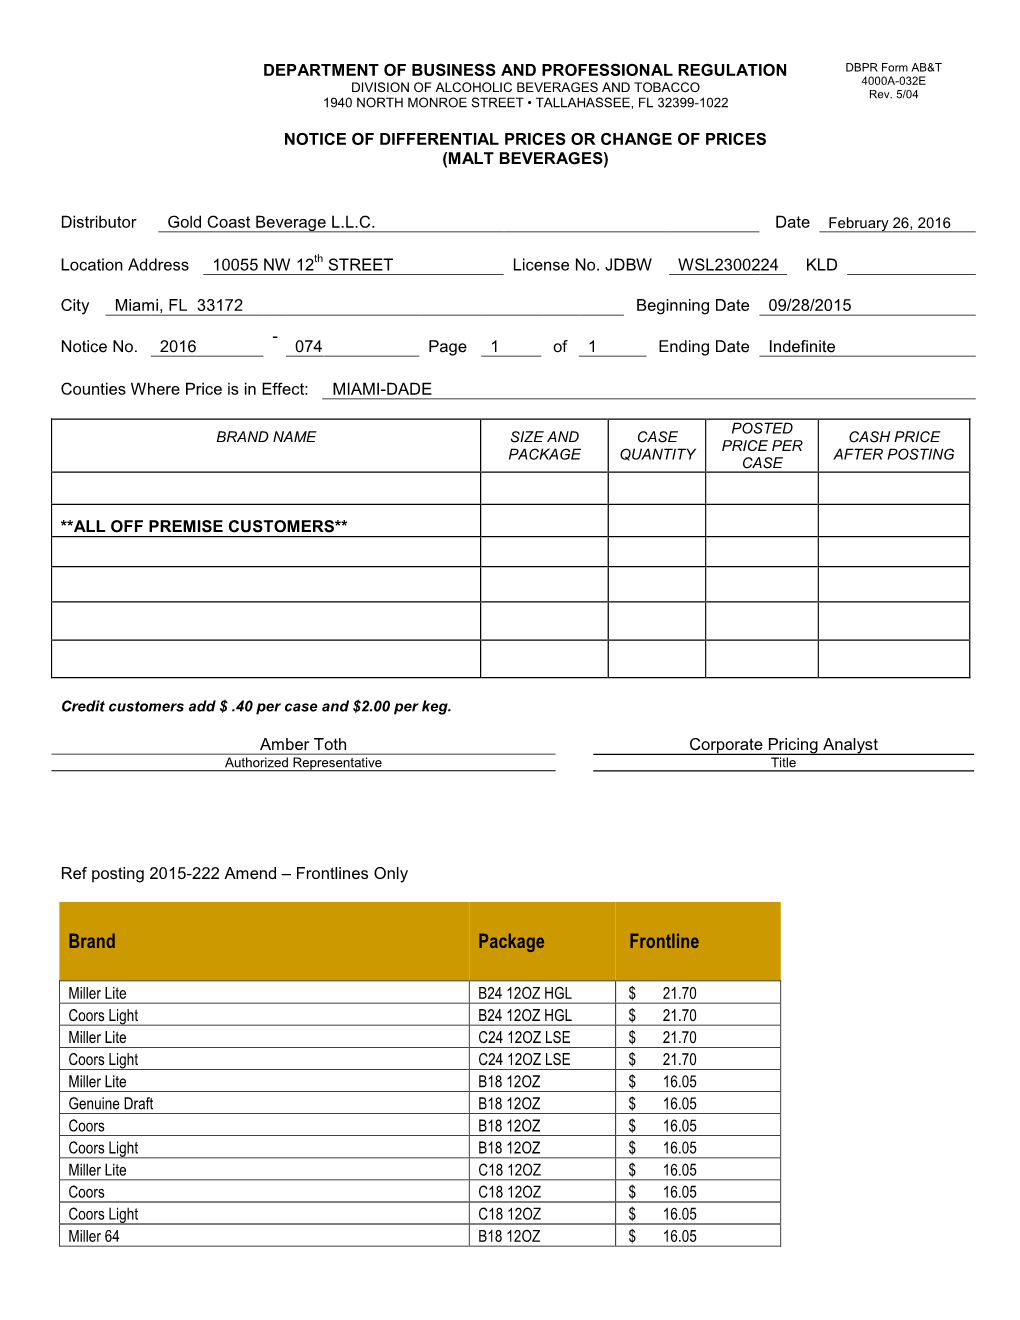 DEPARTMENT of BUSINESS and PROFESSIONAL REGULATION DBPR Form AB&T DIVISION of ALCOHOLIC BEVERAGES and TOBACCO 4000A-032E Rev